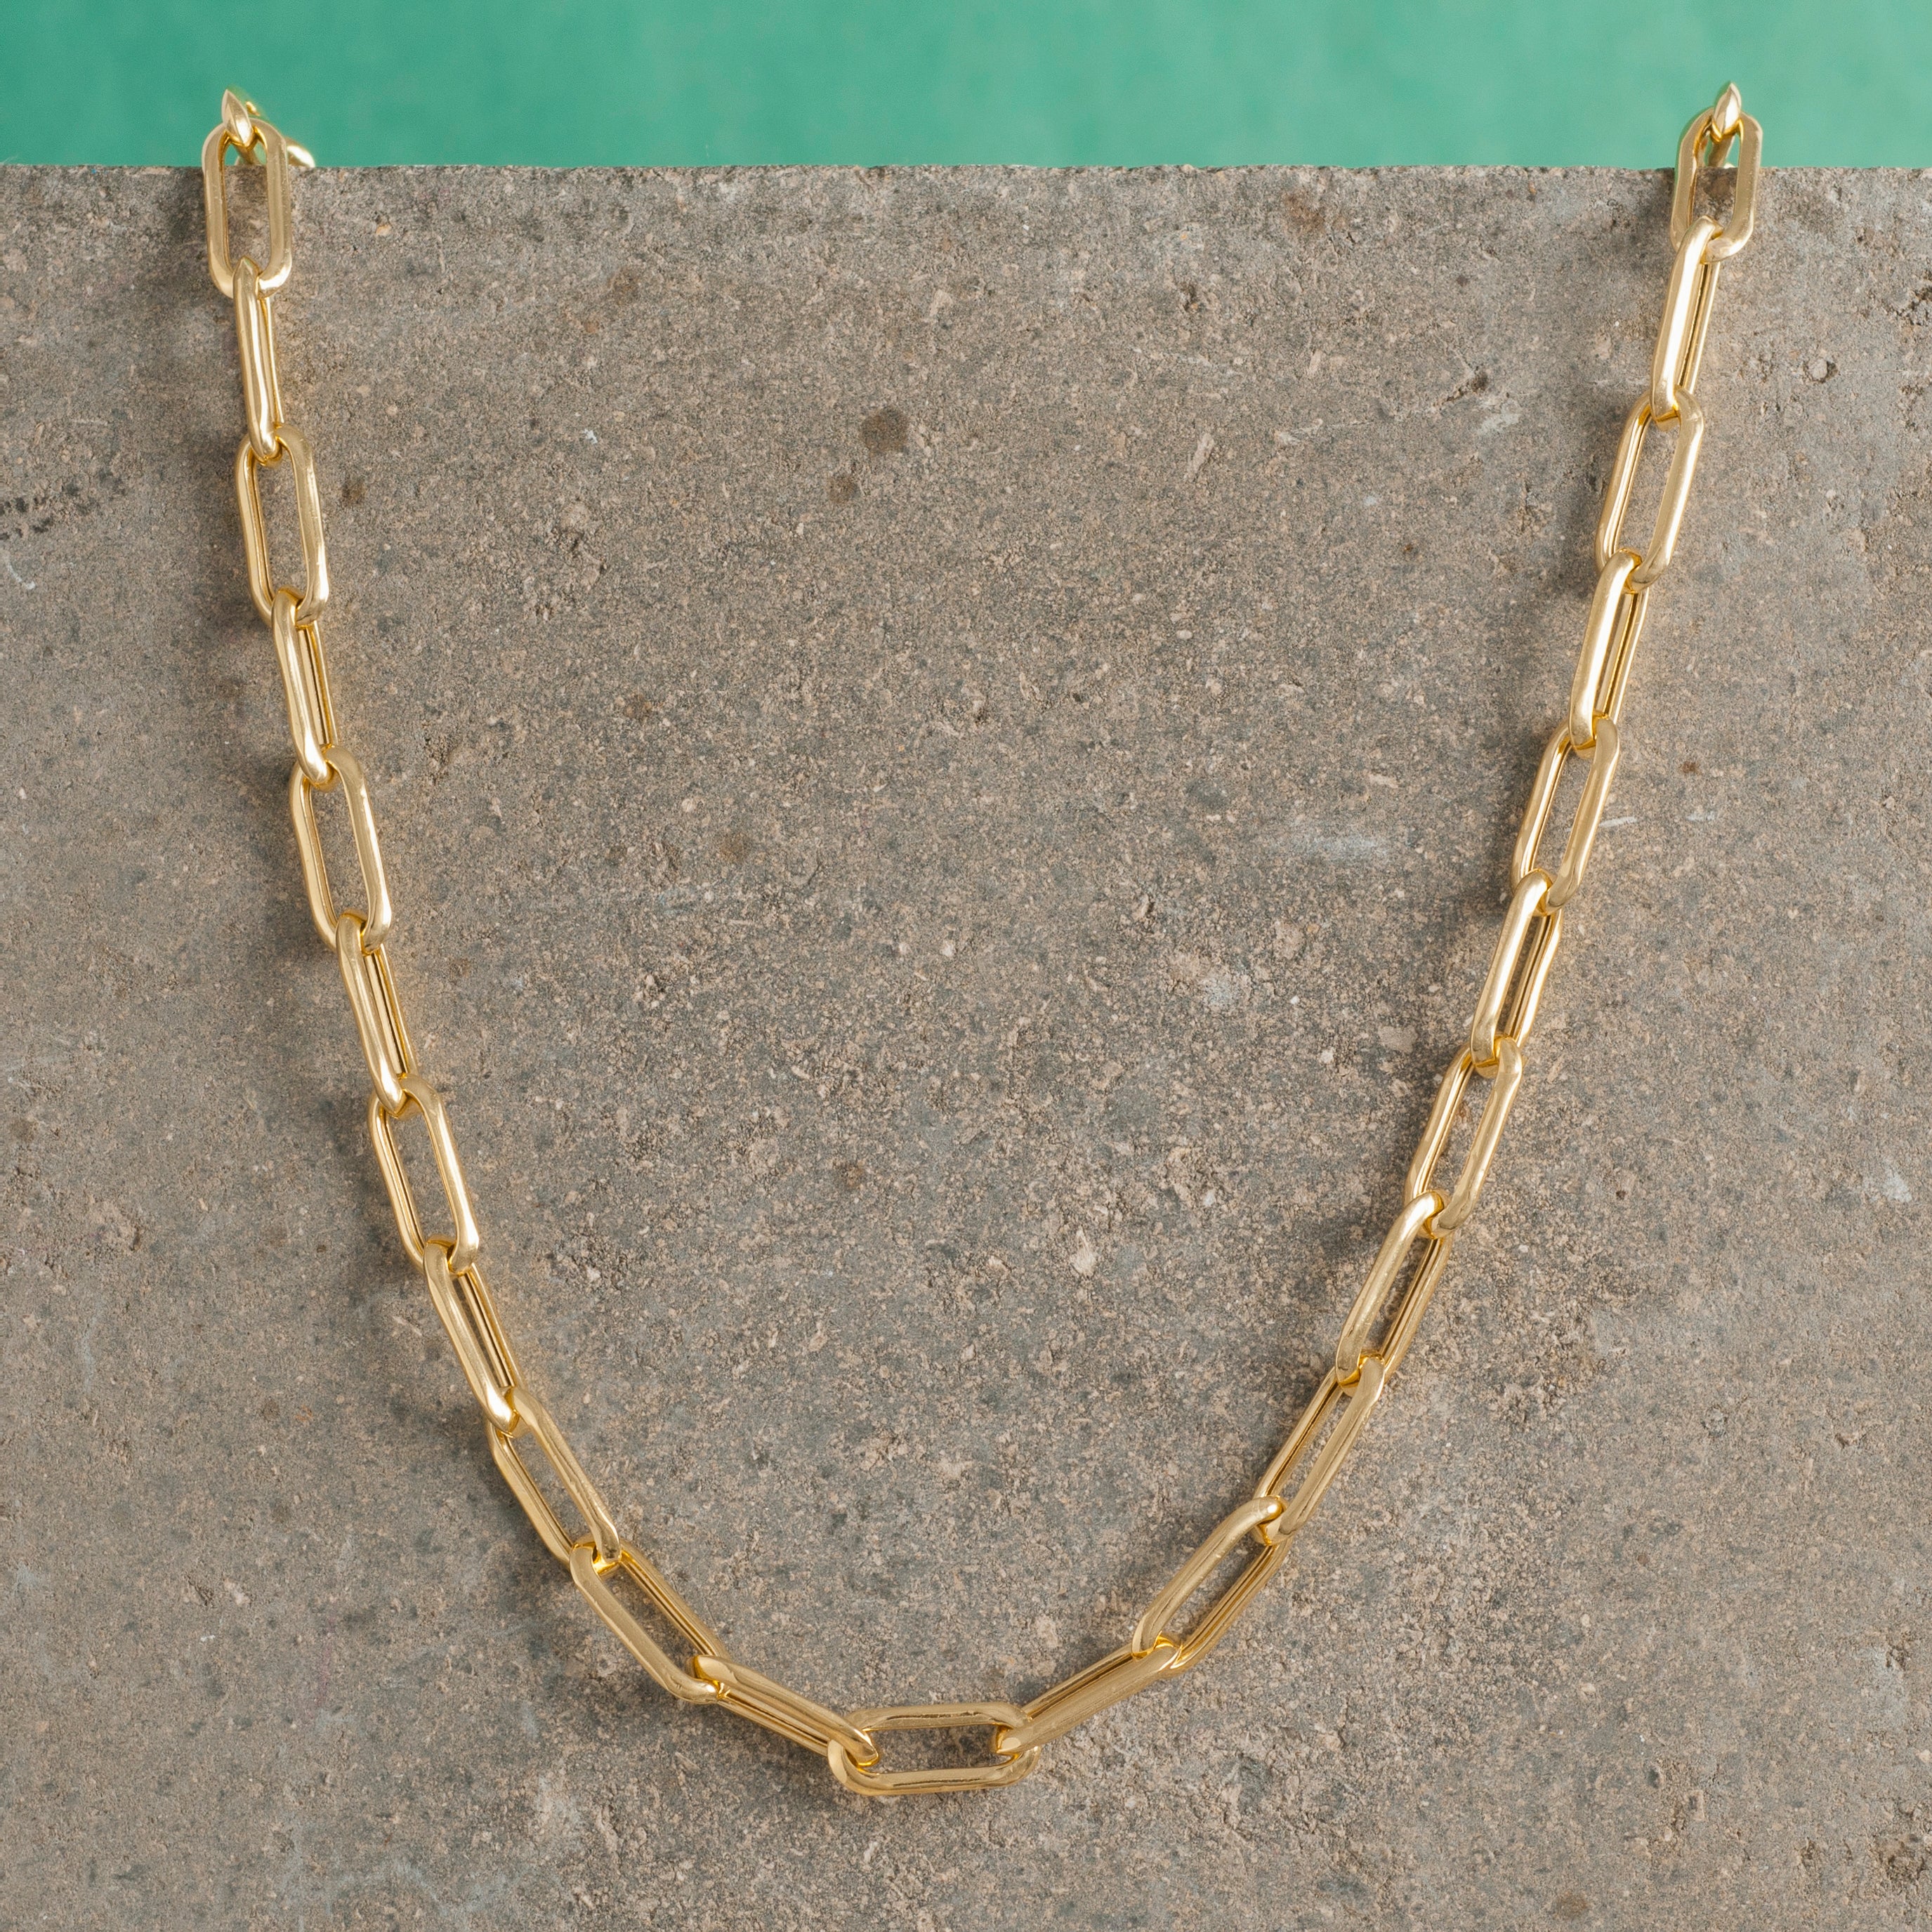 GOLD LONG LINK CHAIN NECKLACE